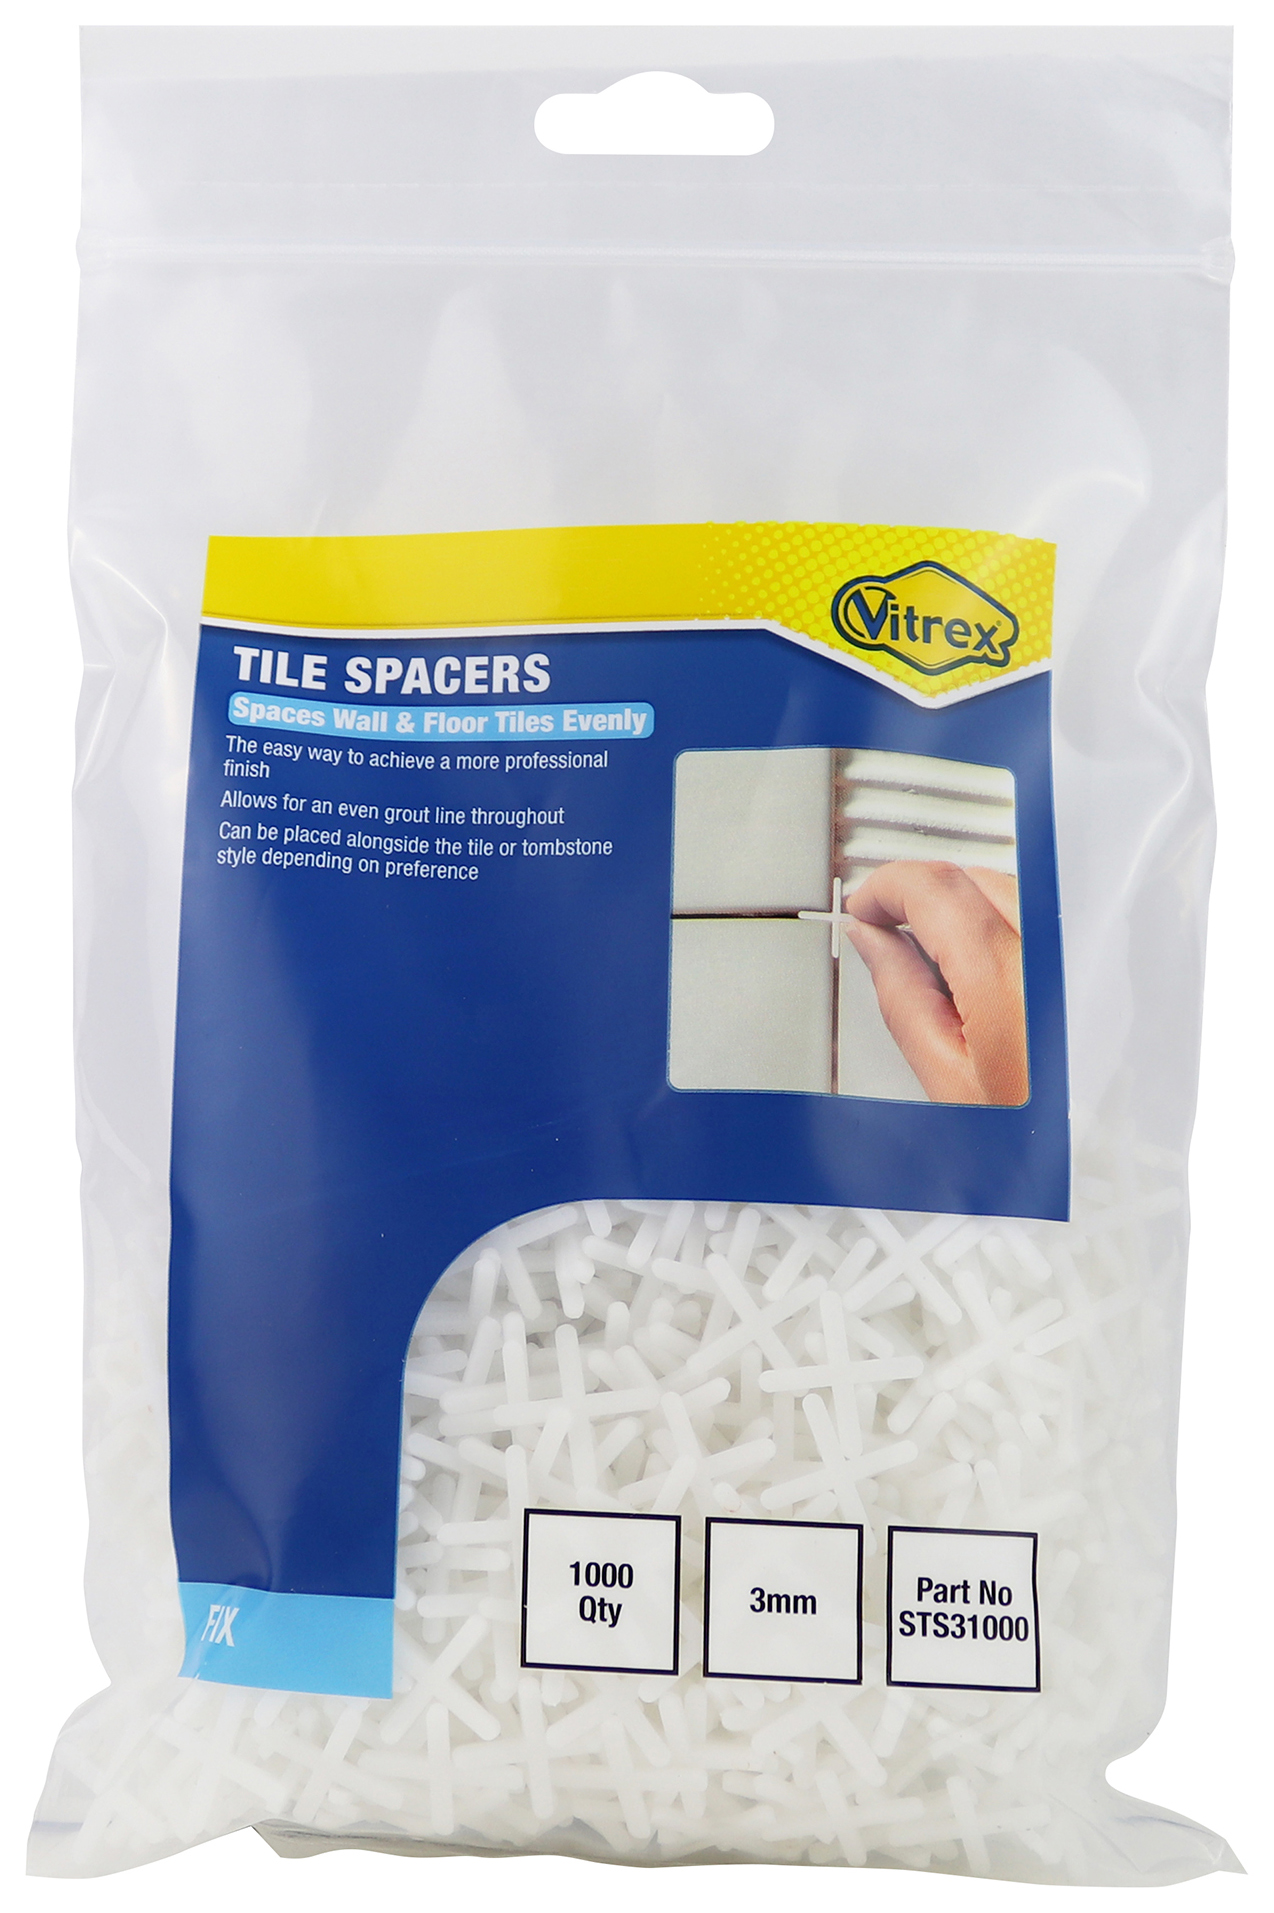 Vitrex 3mm Tile Spacers - Pack of 1000